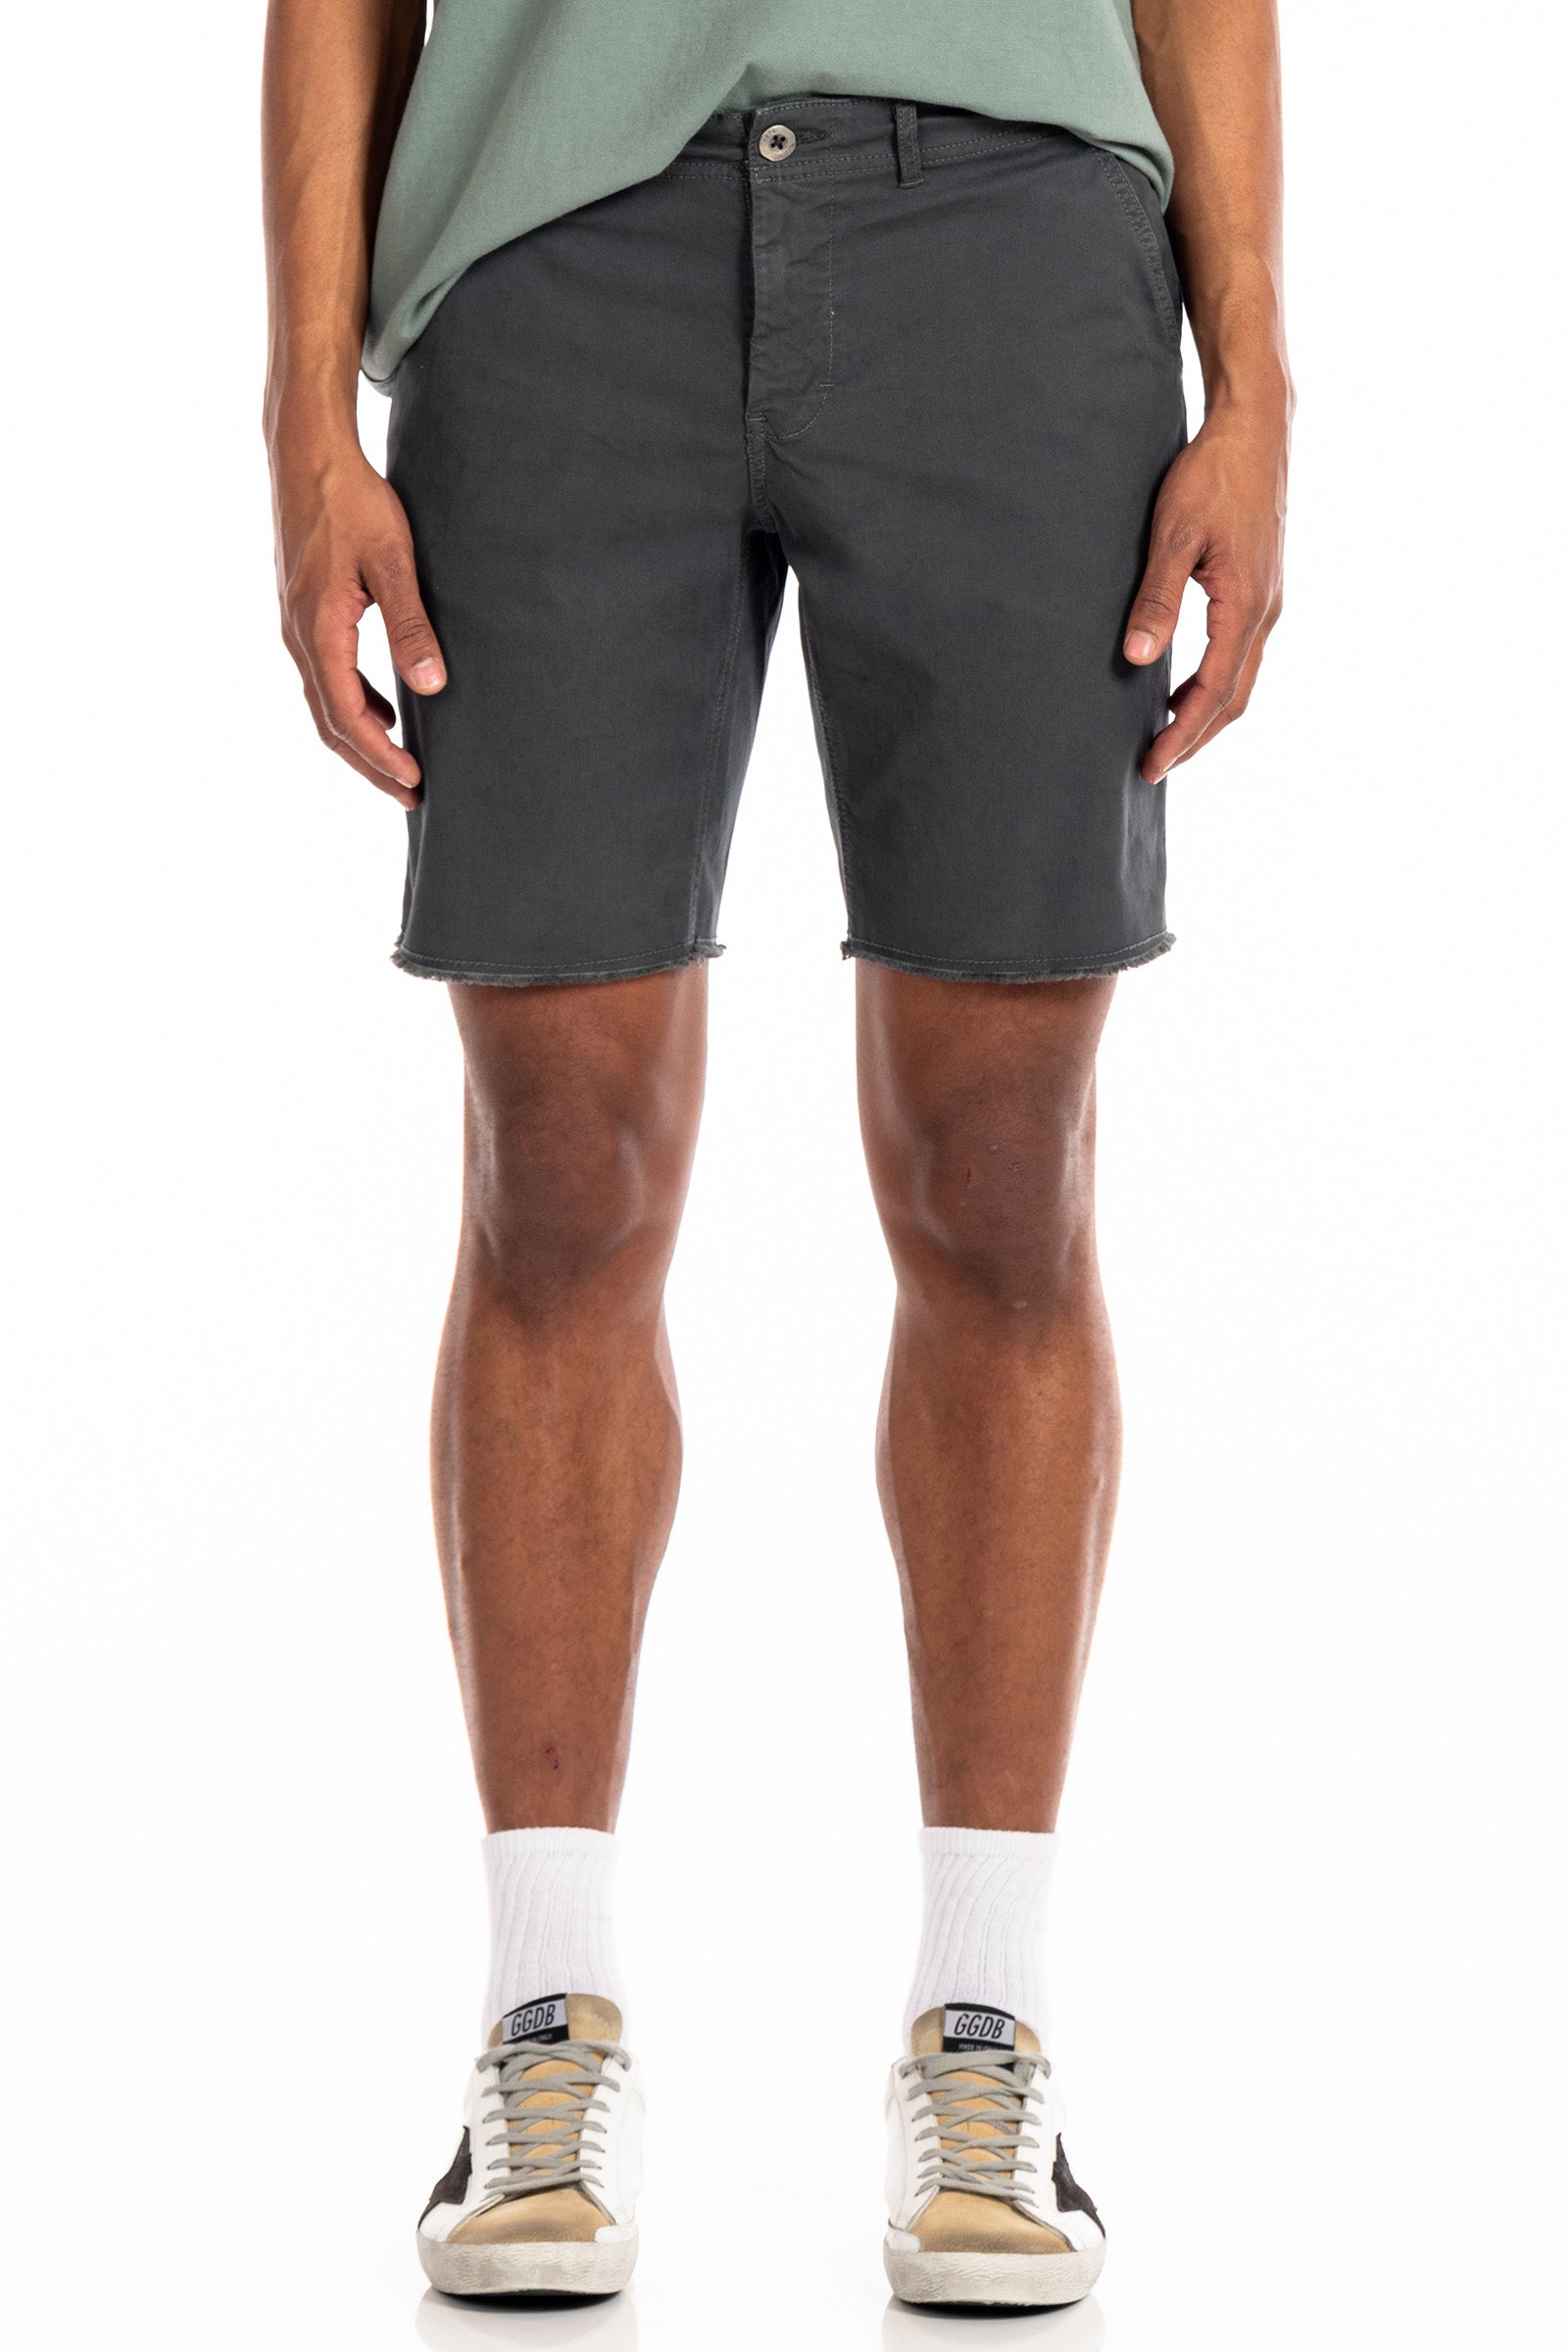 Original Paperbacks Brentwood Chino Short in Gunmetal on Model Cropped Front View